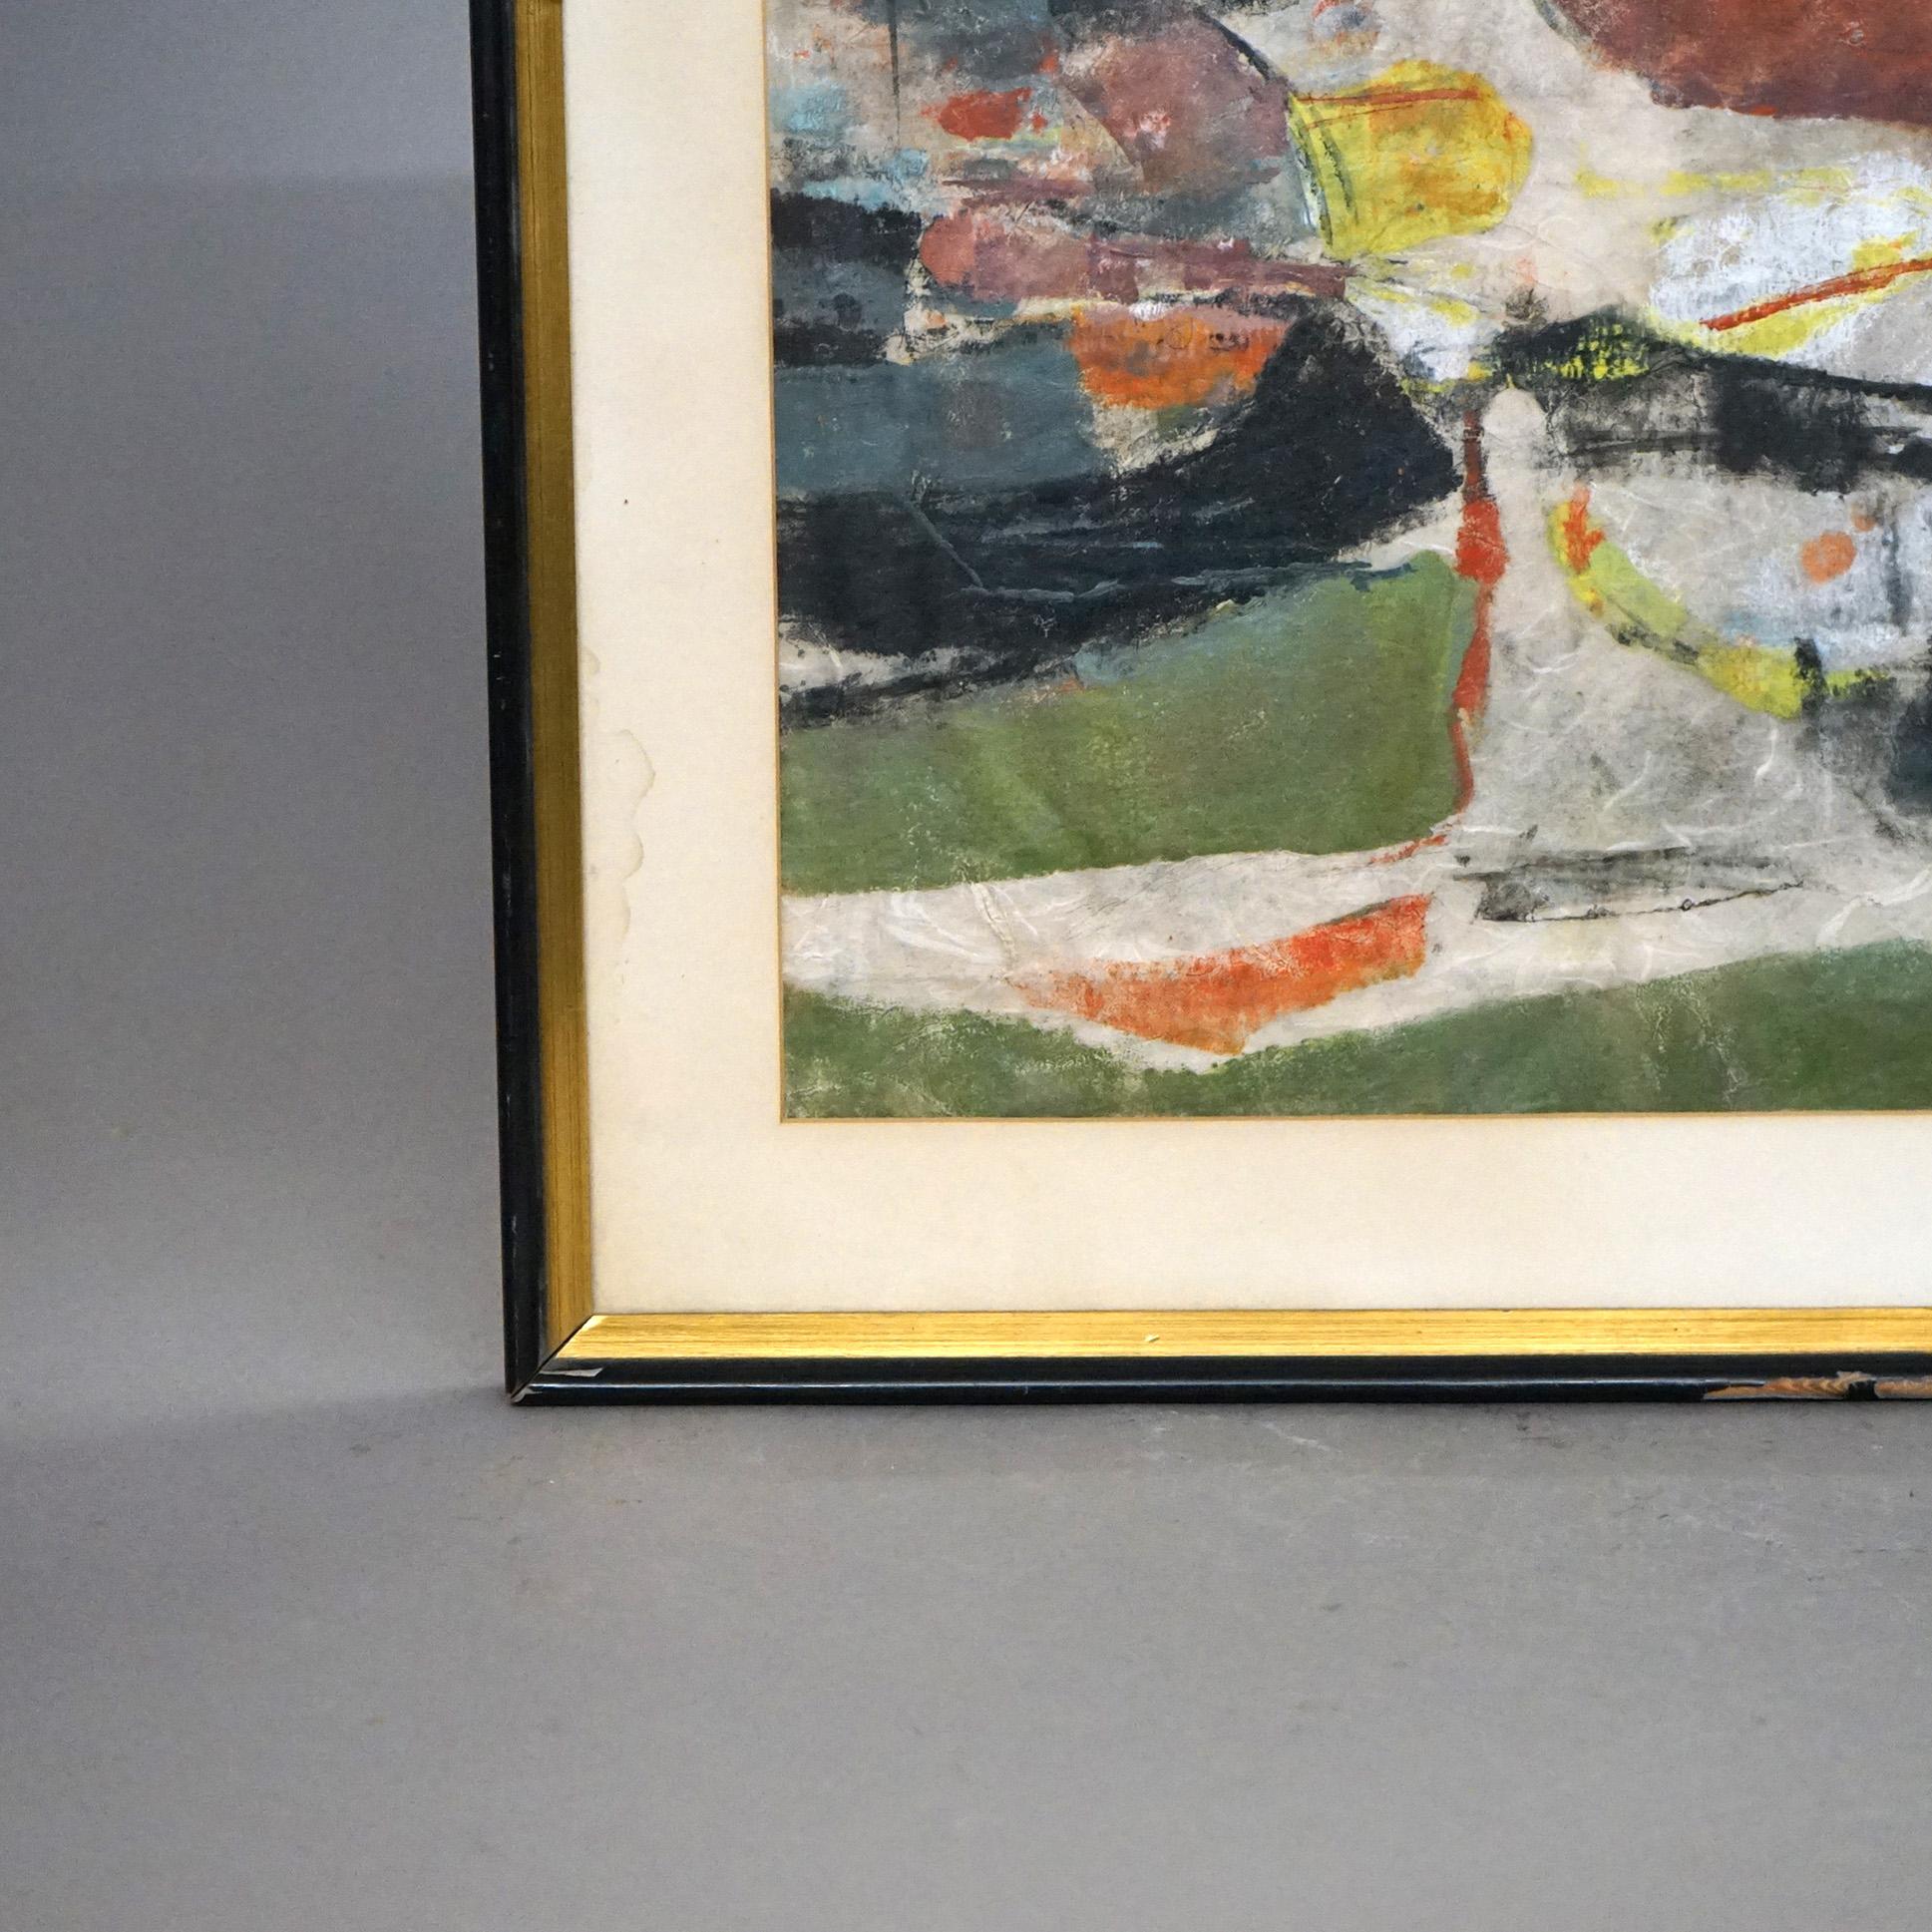 American Mid Century Modern Mixed Media Abstract “Bayou” Painting By D. Hoyt, Mid-20thC For Sale